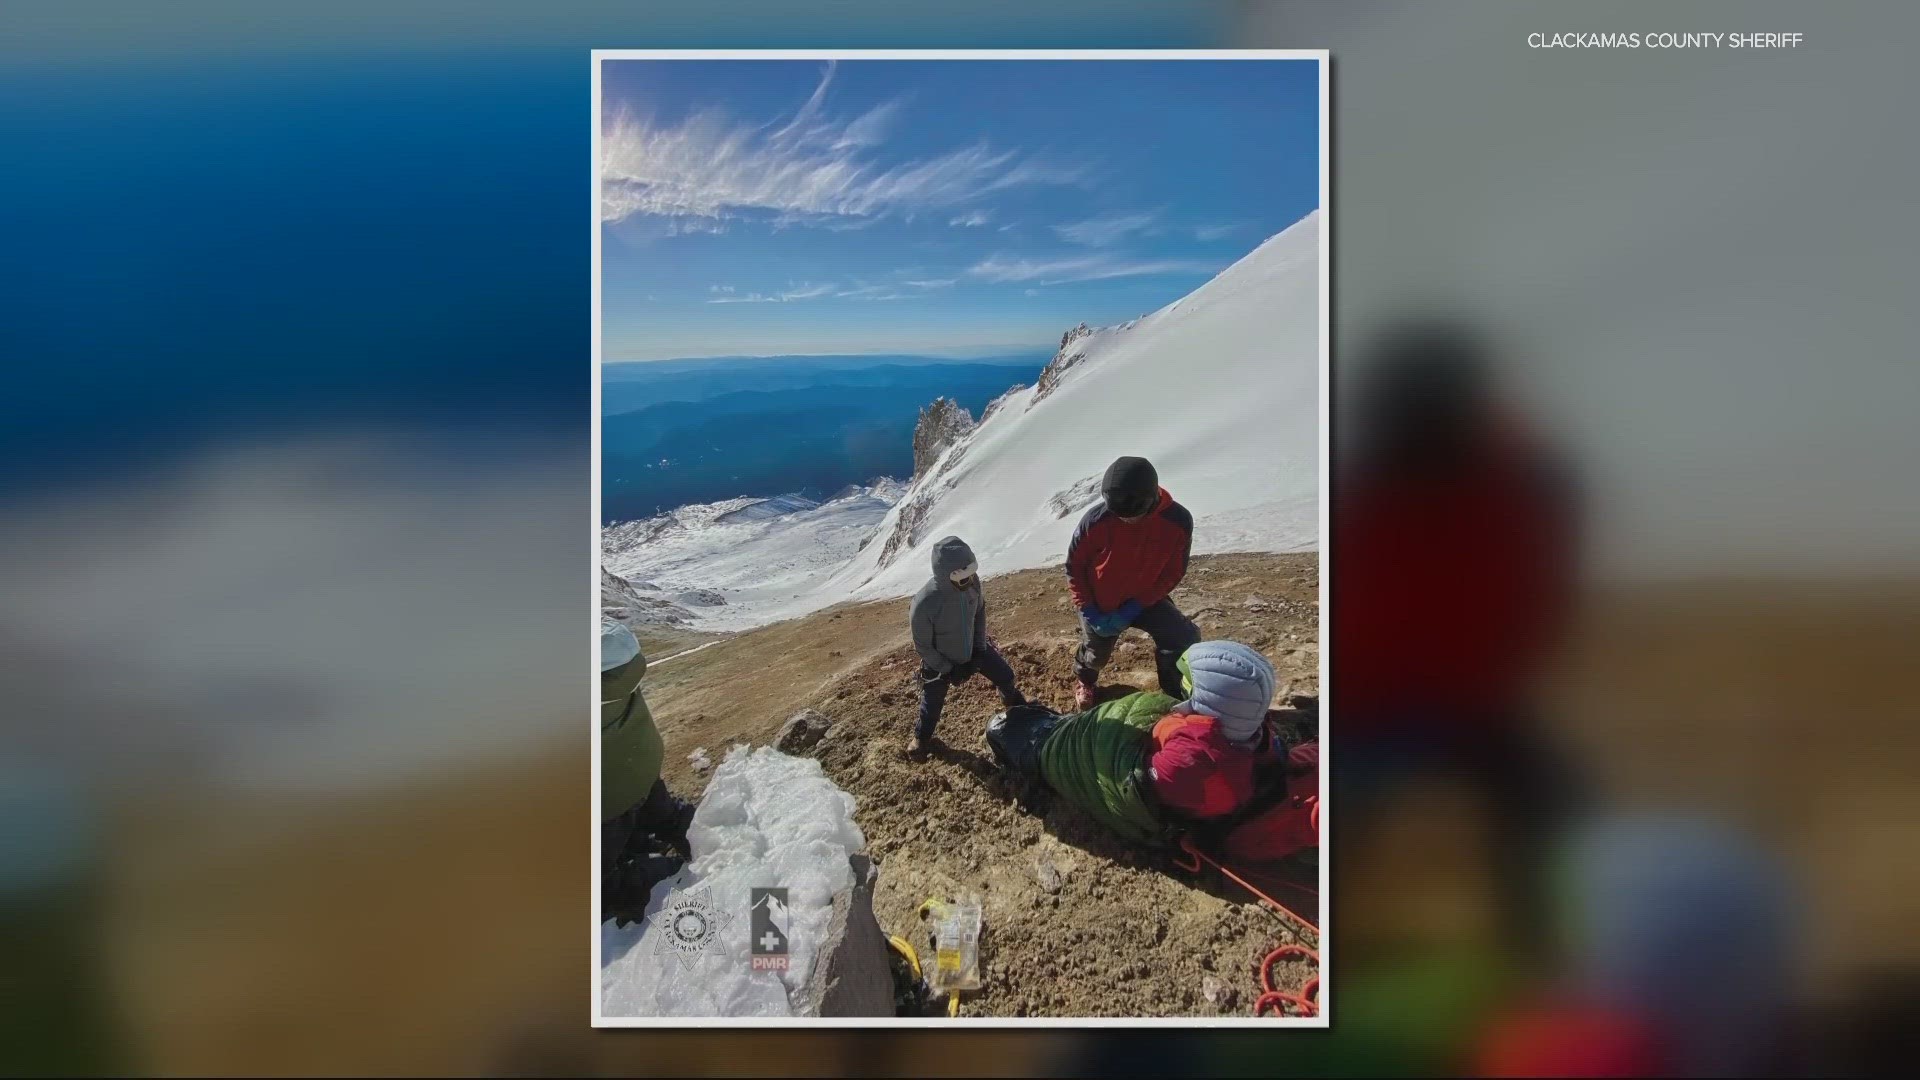 The rescue operation took all afternoon Saturday. The woman was transported to a hospital after being carried down to the Timberline Lodge parking lot.